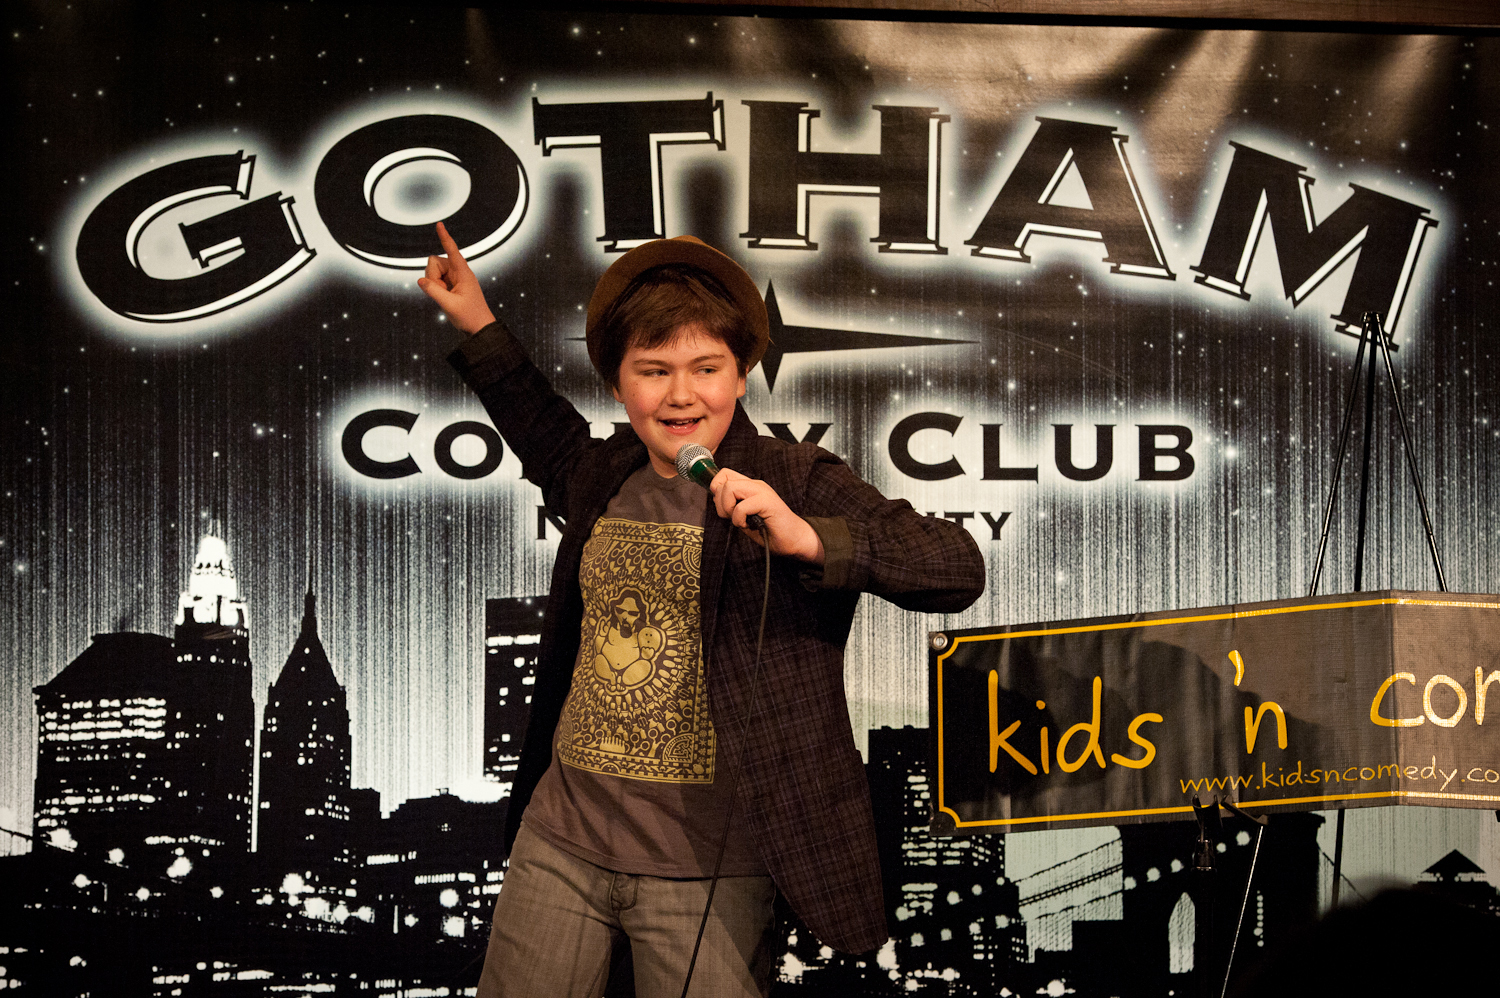 Conor performing at Gotham Comedy Club, as part of Kids 'n Comedy